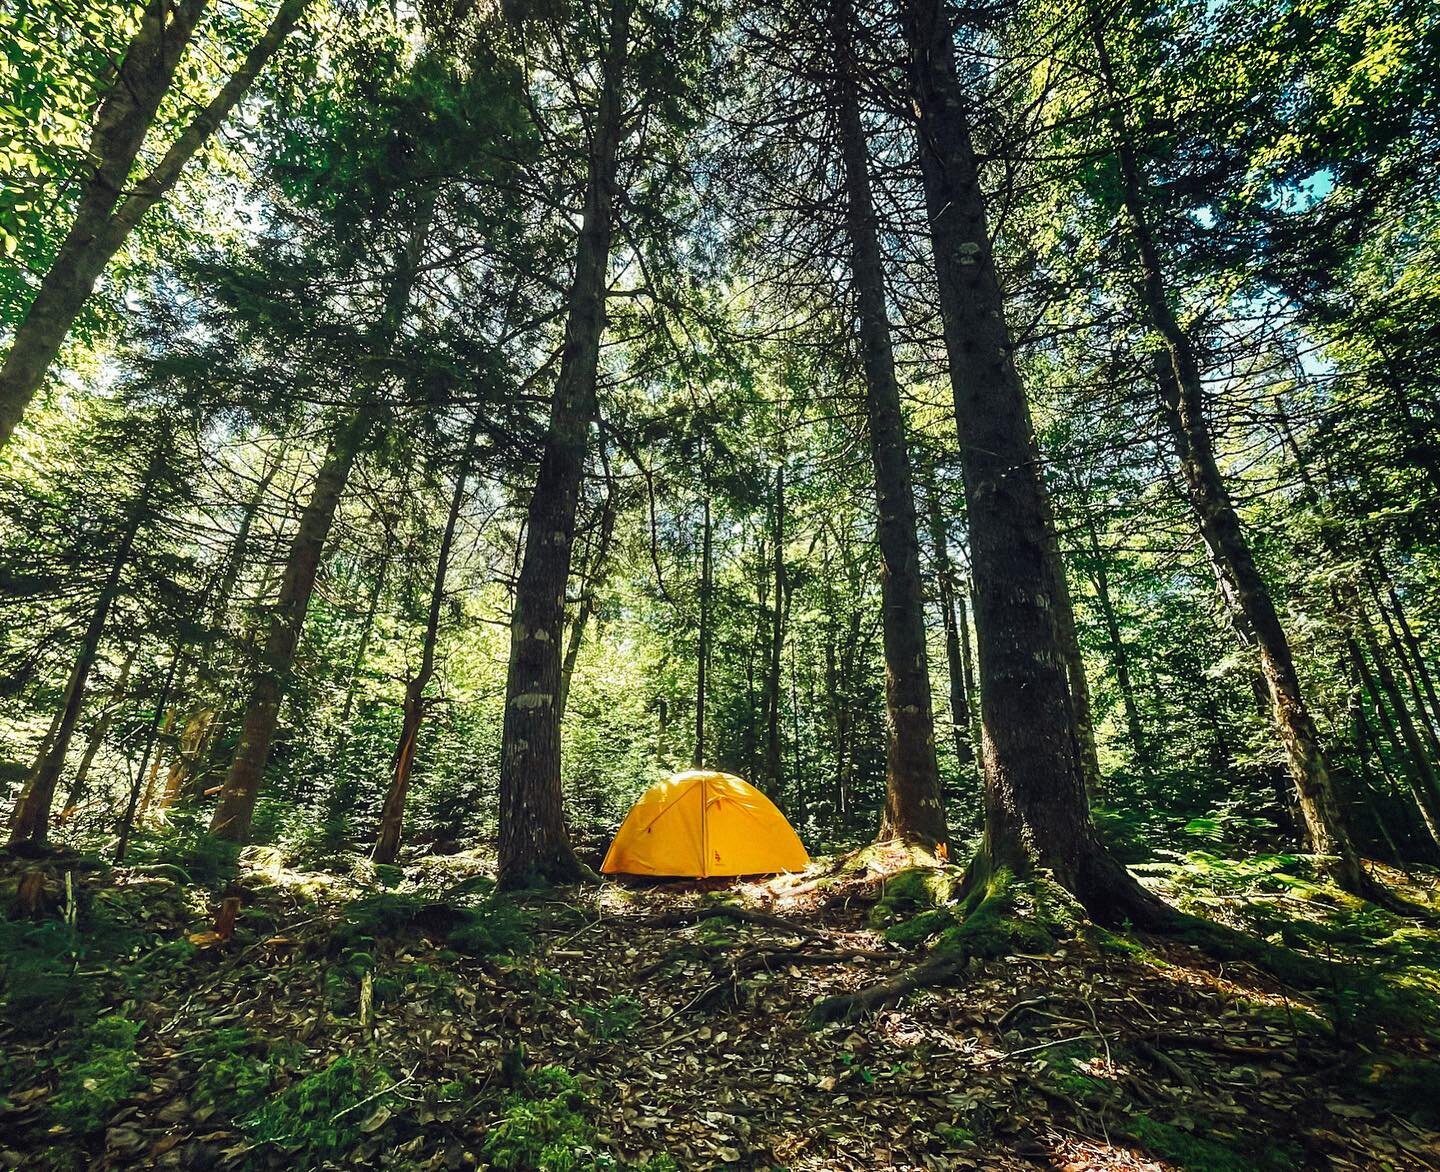 We&rsquo;re starting to map out our tent sites and thought you&rsquo;d all like to see a preview of what they&rsquo;ll look like!🏕

Tag your camping buddies in the comments!
.
.
#stayatseek #truronovascotia #getoutside #campinglife #tentcamping #nov